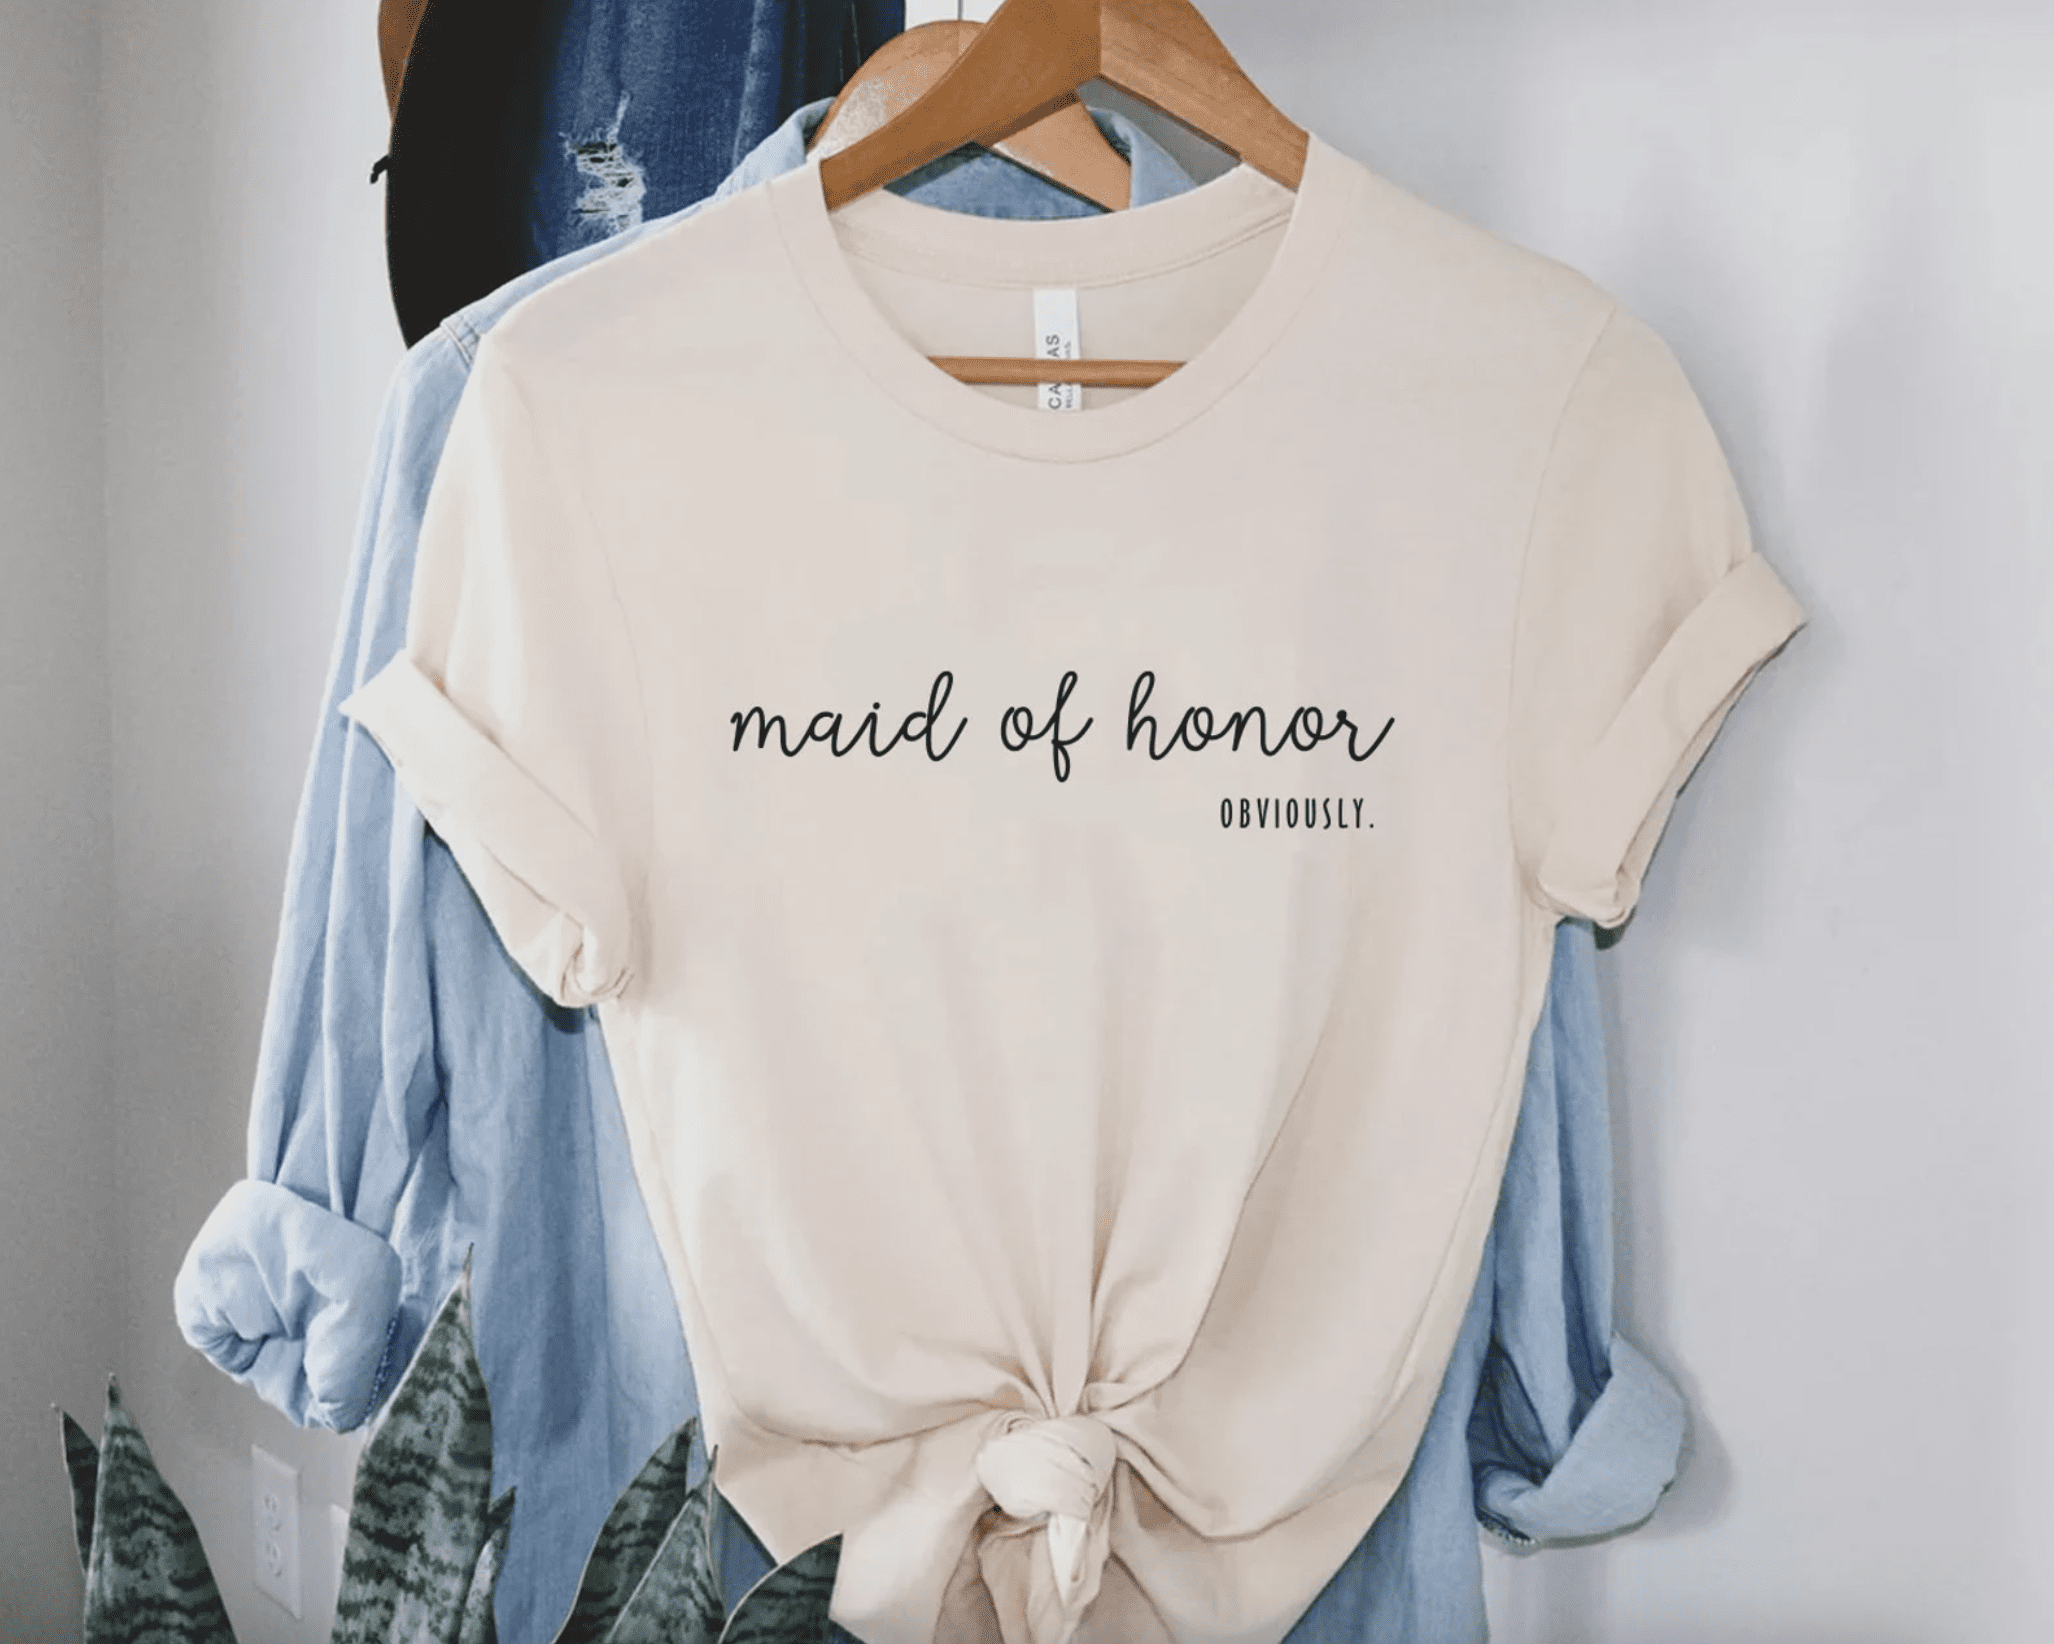 maid of honor t-shirt